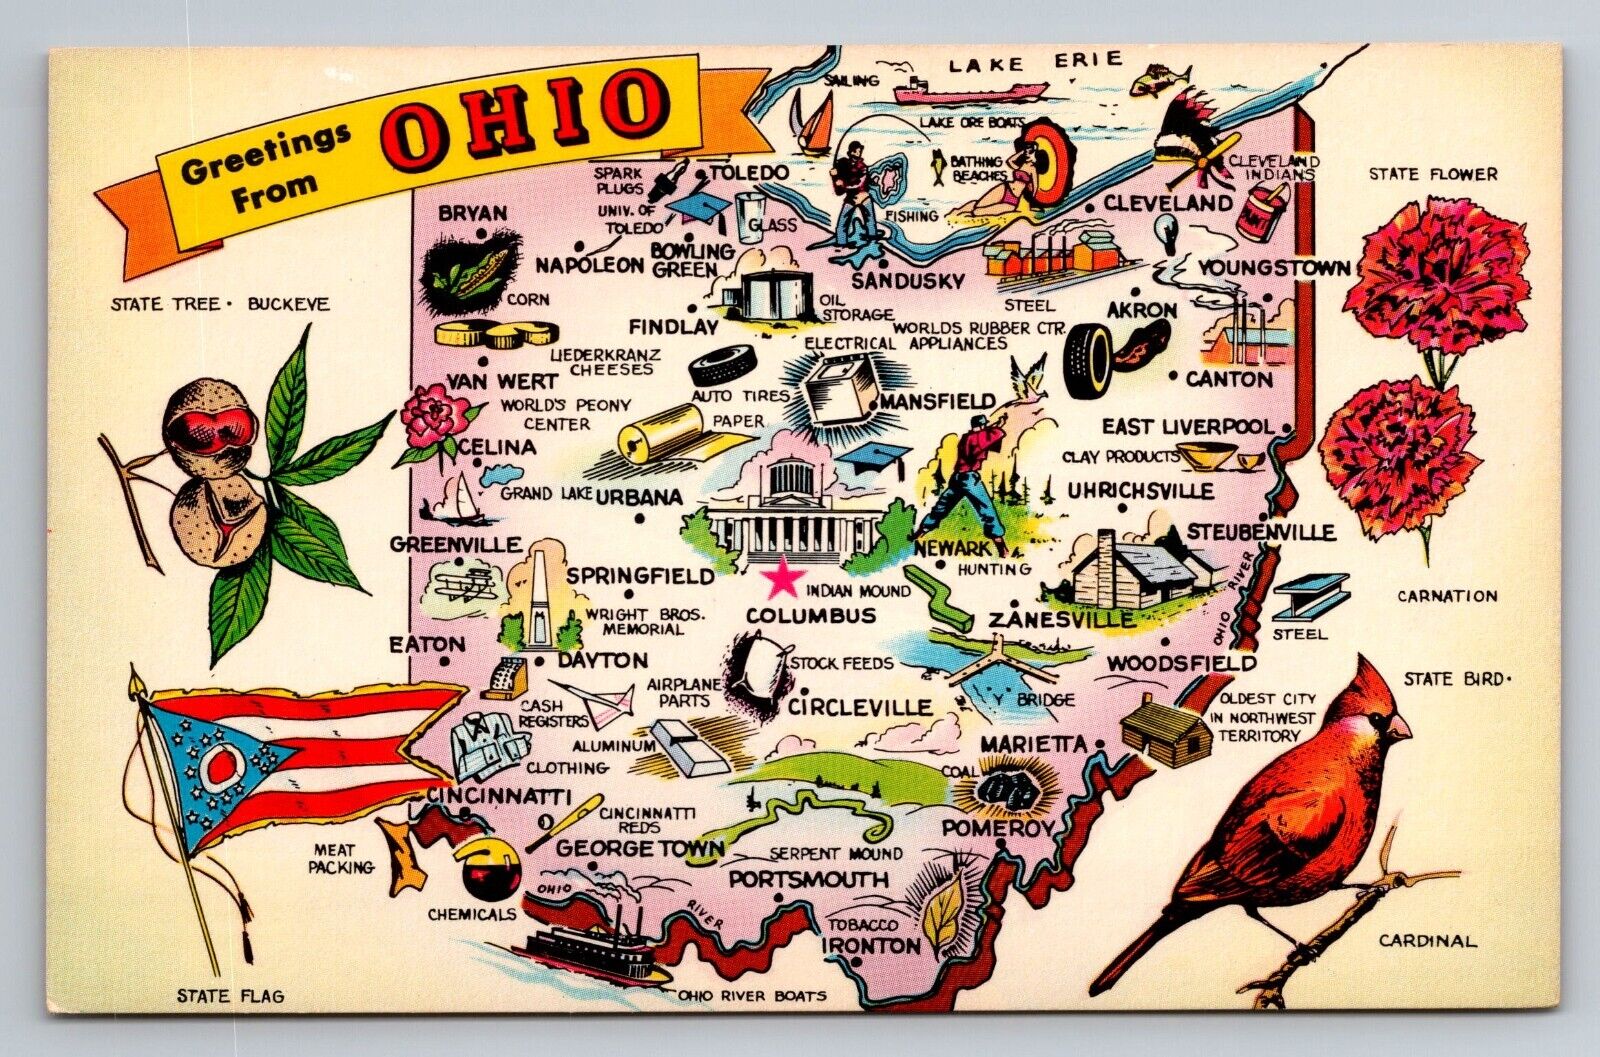 Greetings From Ohio Map Of Attractions Vintage Unposted Postcard